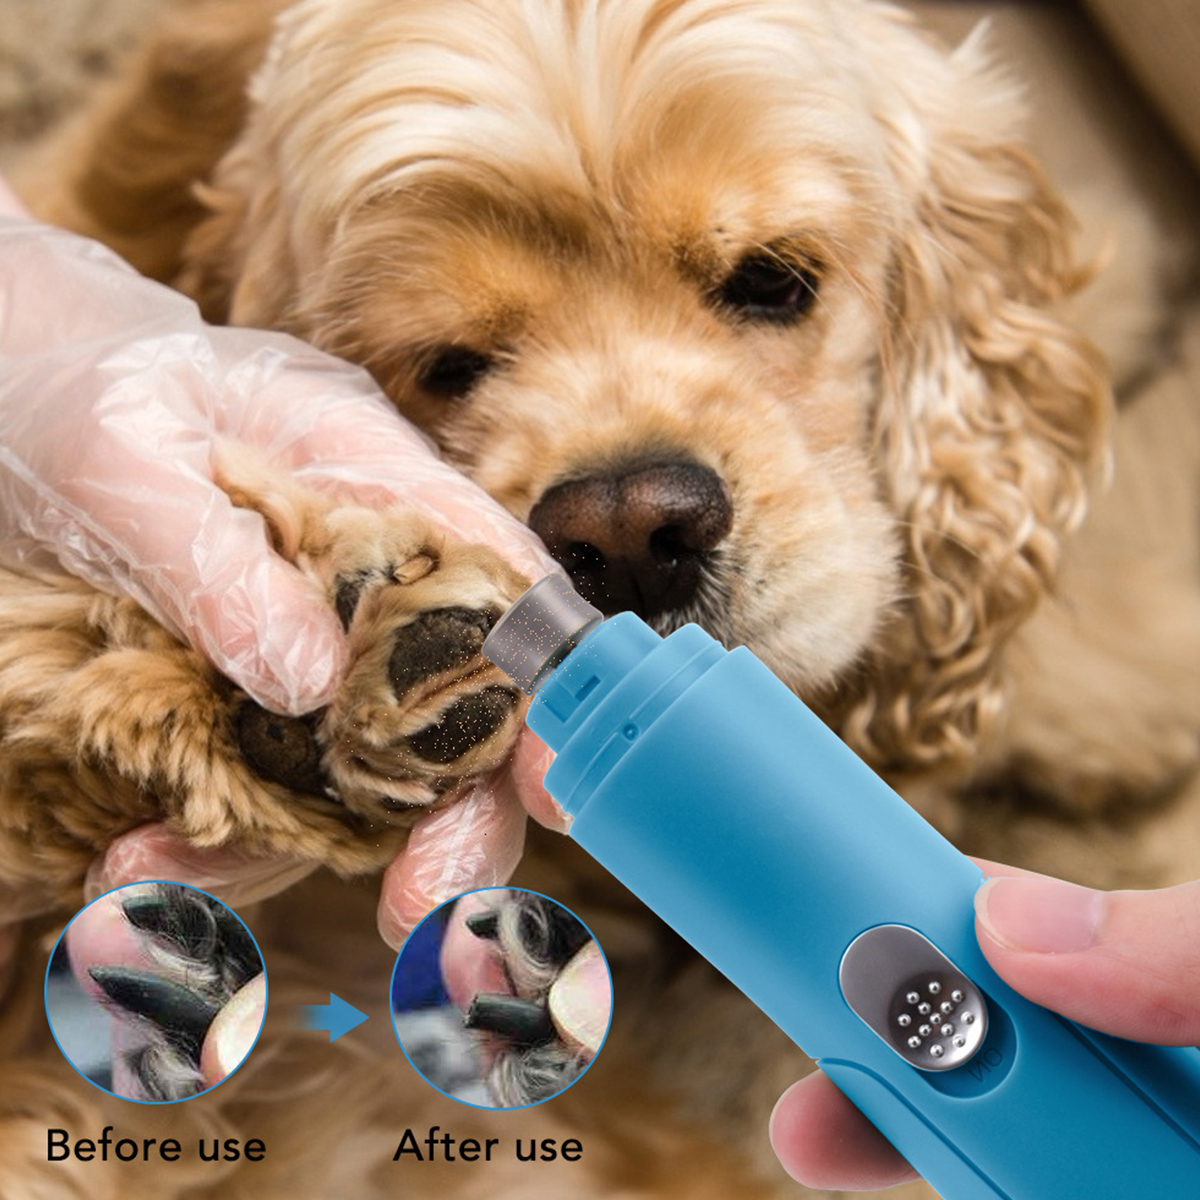 Dog-Nail-Grinder-3-Ports-Rechargeable-Low-Vibrations-Pet-Nail-Trimmer-1937723-2